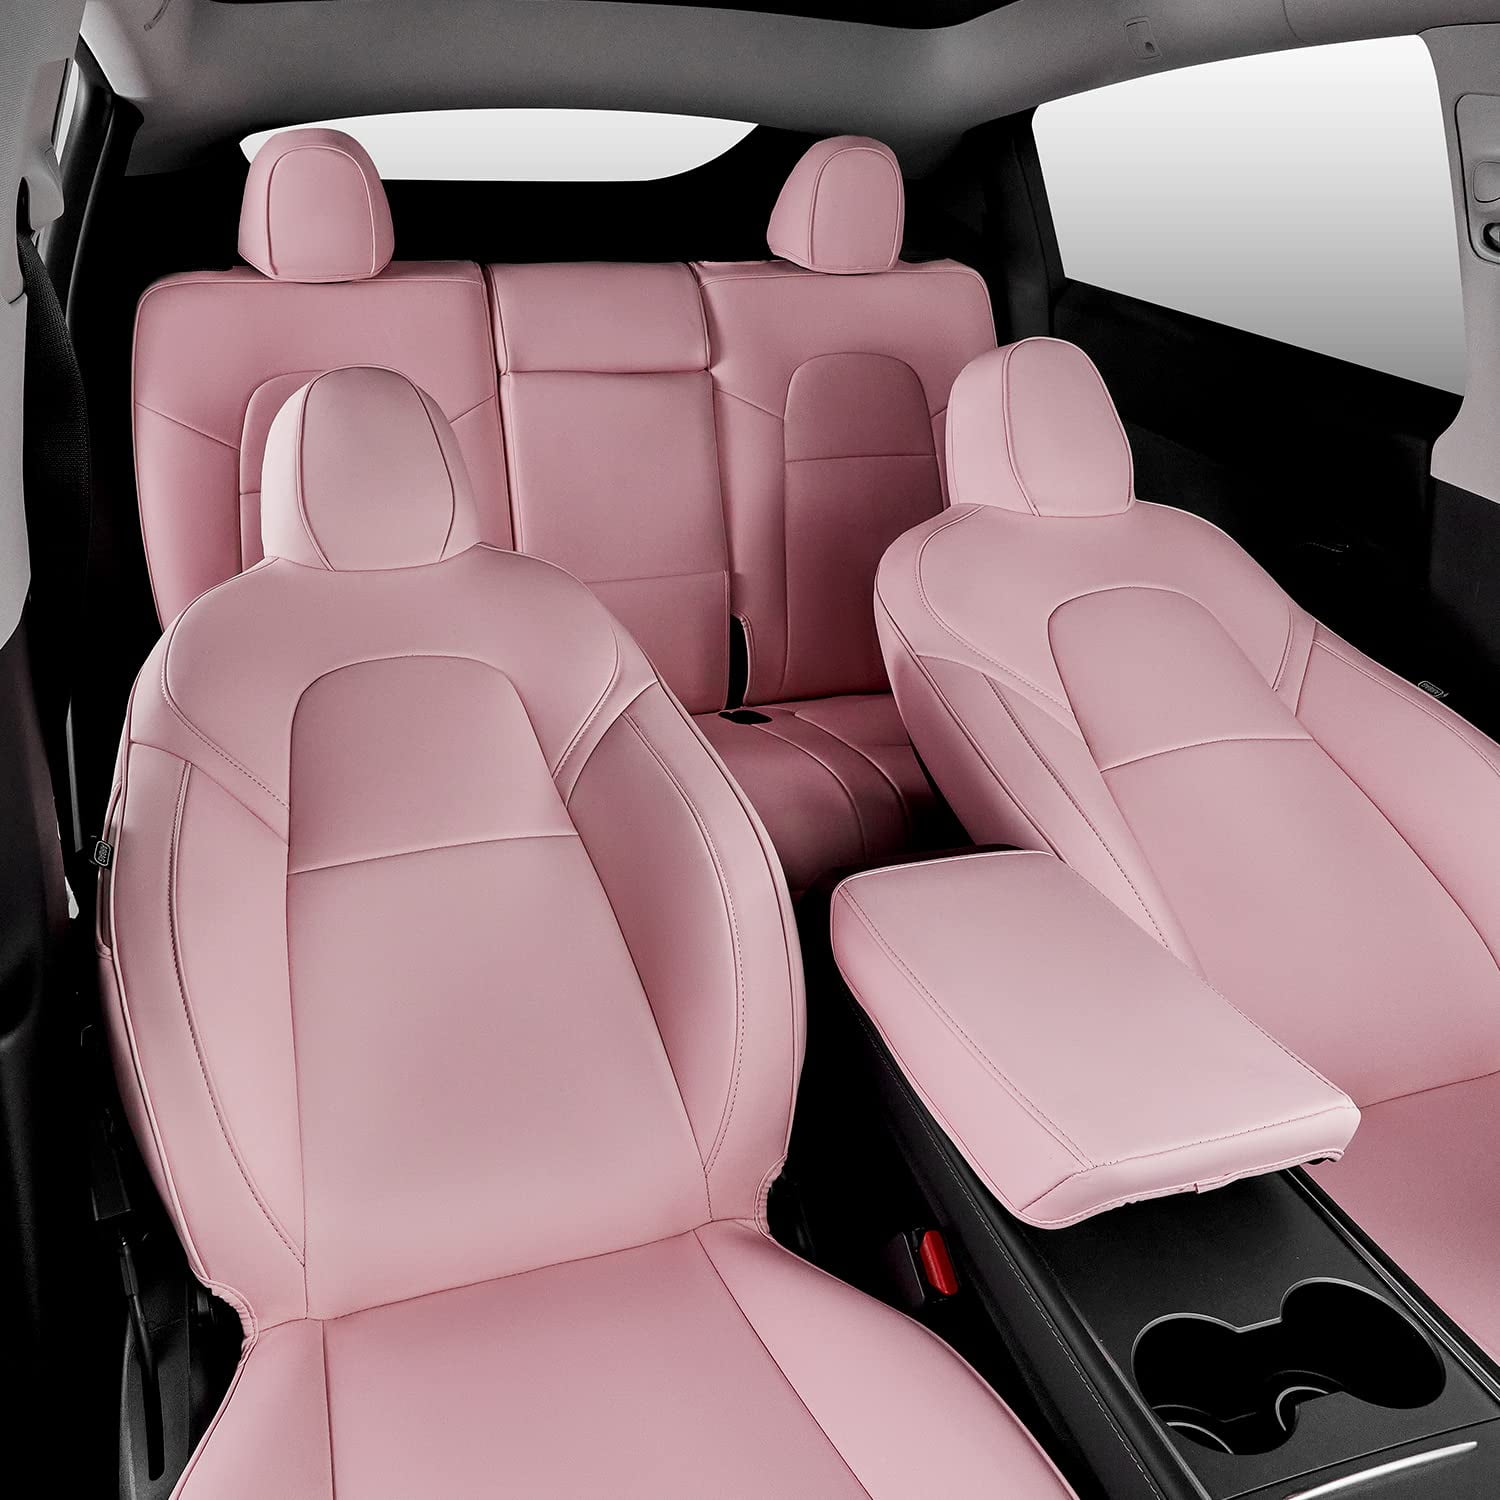 Tesla Model Y Seat Covers Pink Nappa Leather Car ...